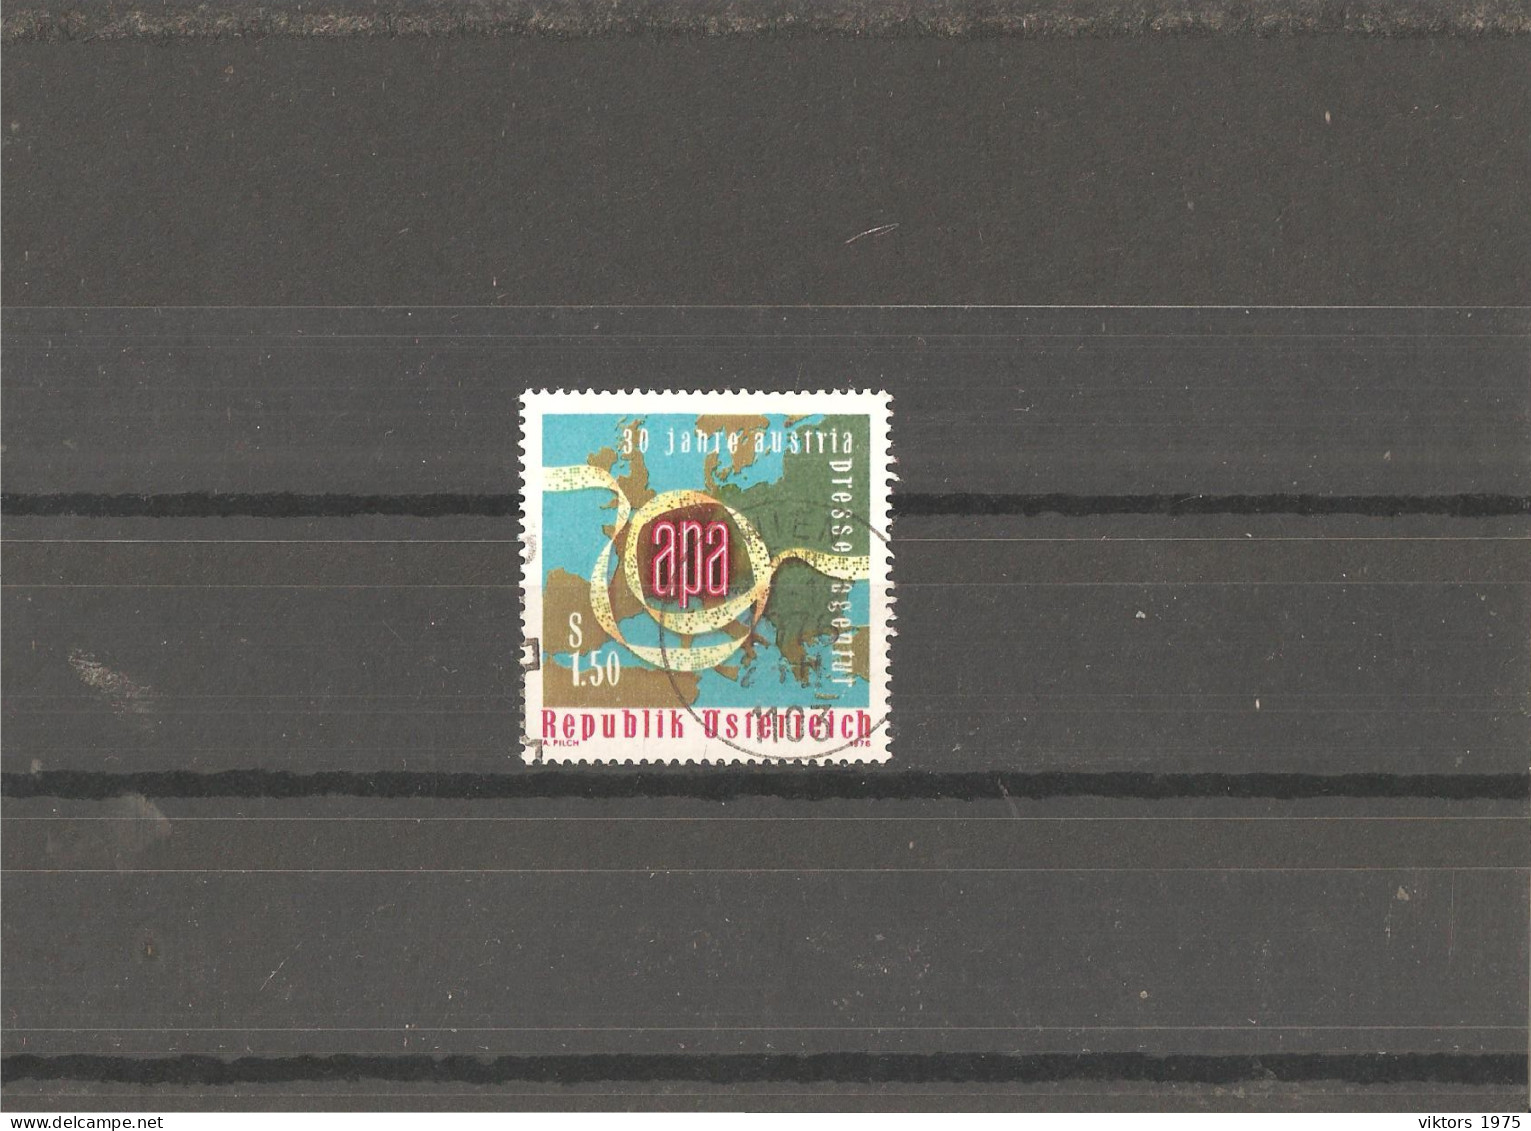 Used Stamp Nr.1533 In MICHEL Catalog - Used Stamps